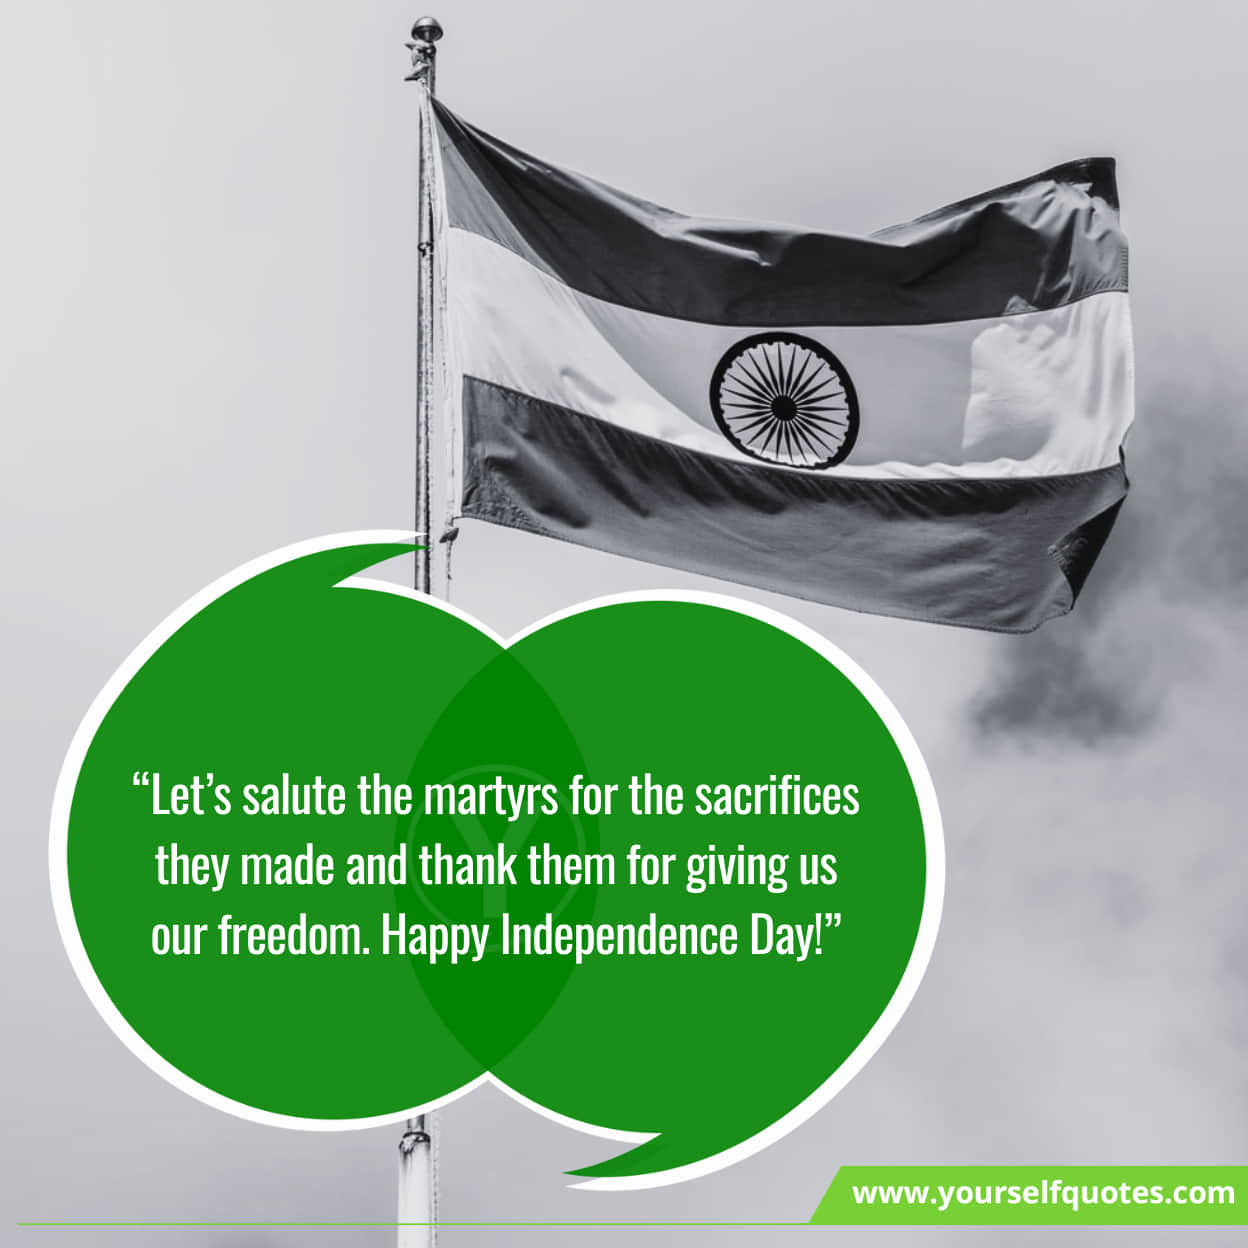 Happy Independence Day Quotes Best Motivational